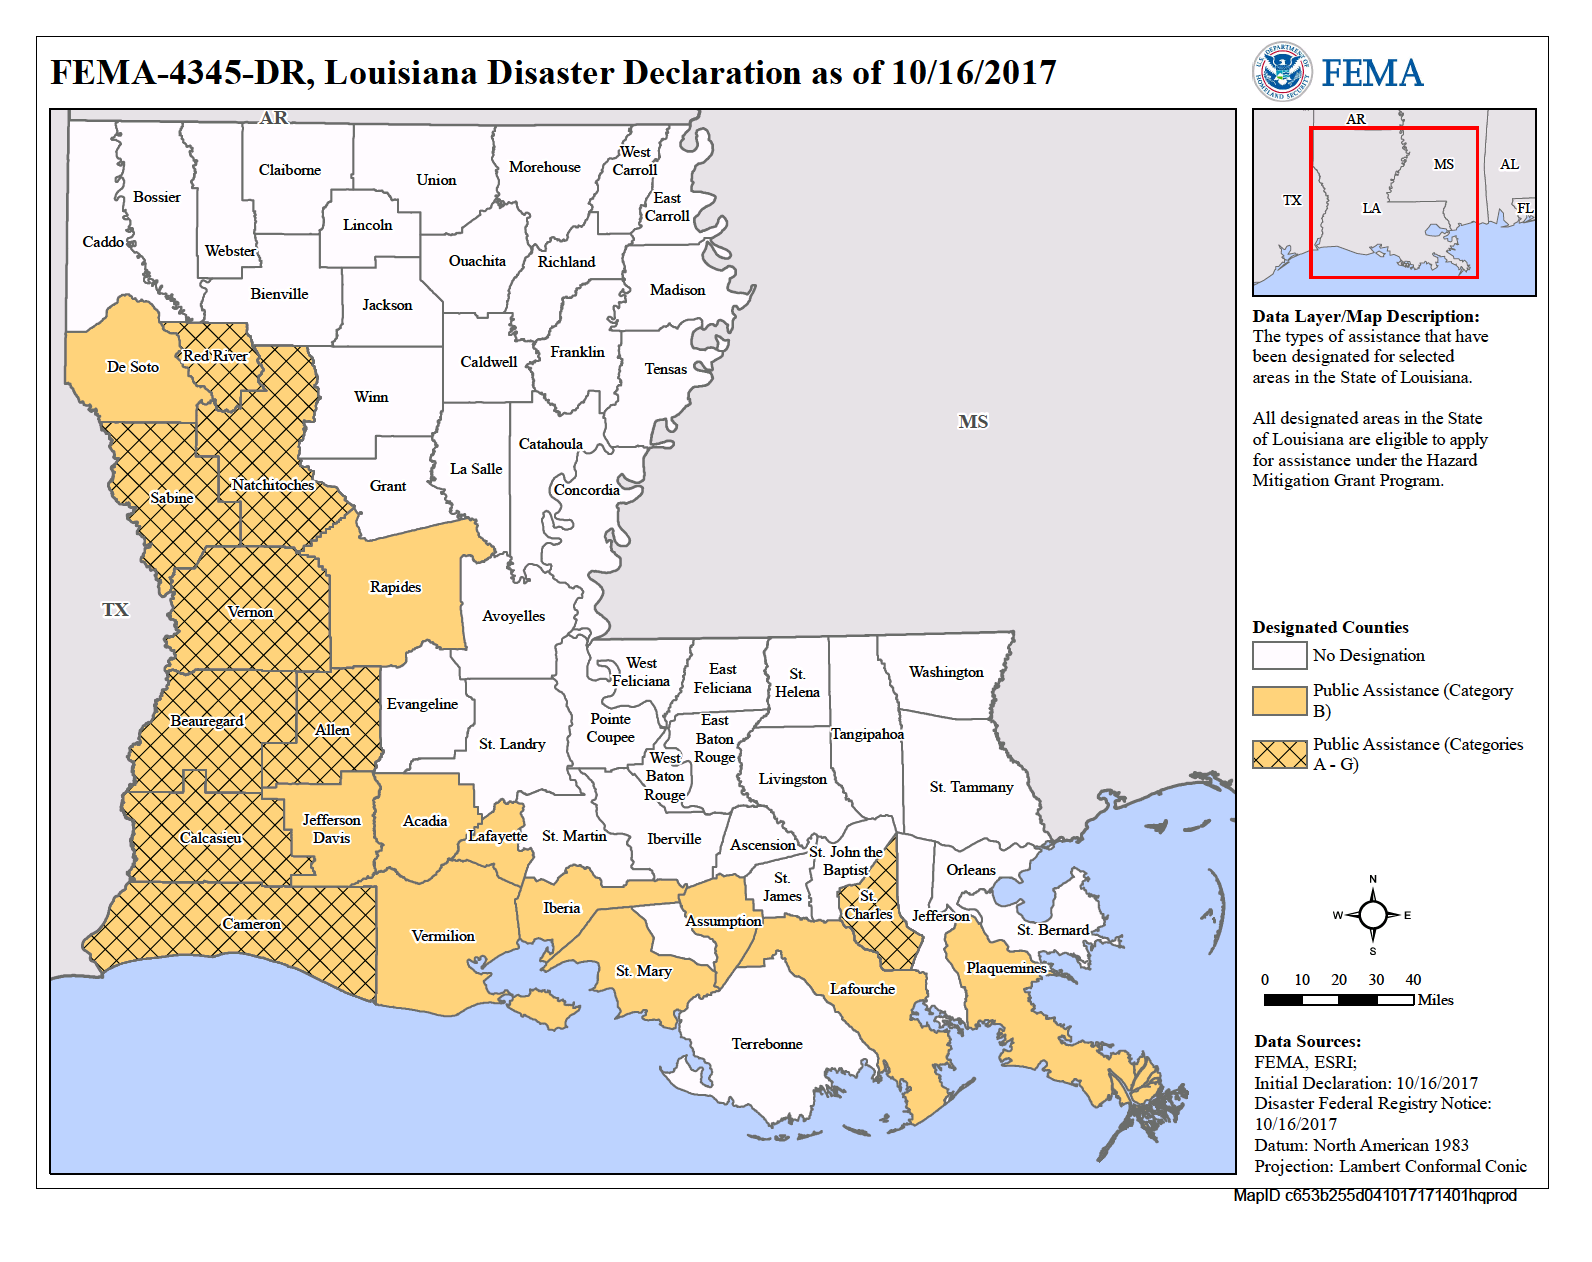 Harvey Disaster Declaration Map - Images All Disaster Msimages.Org